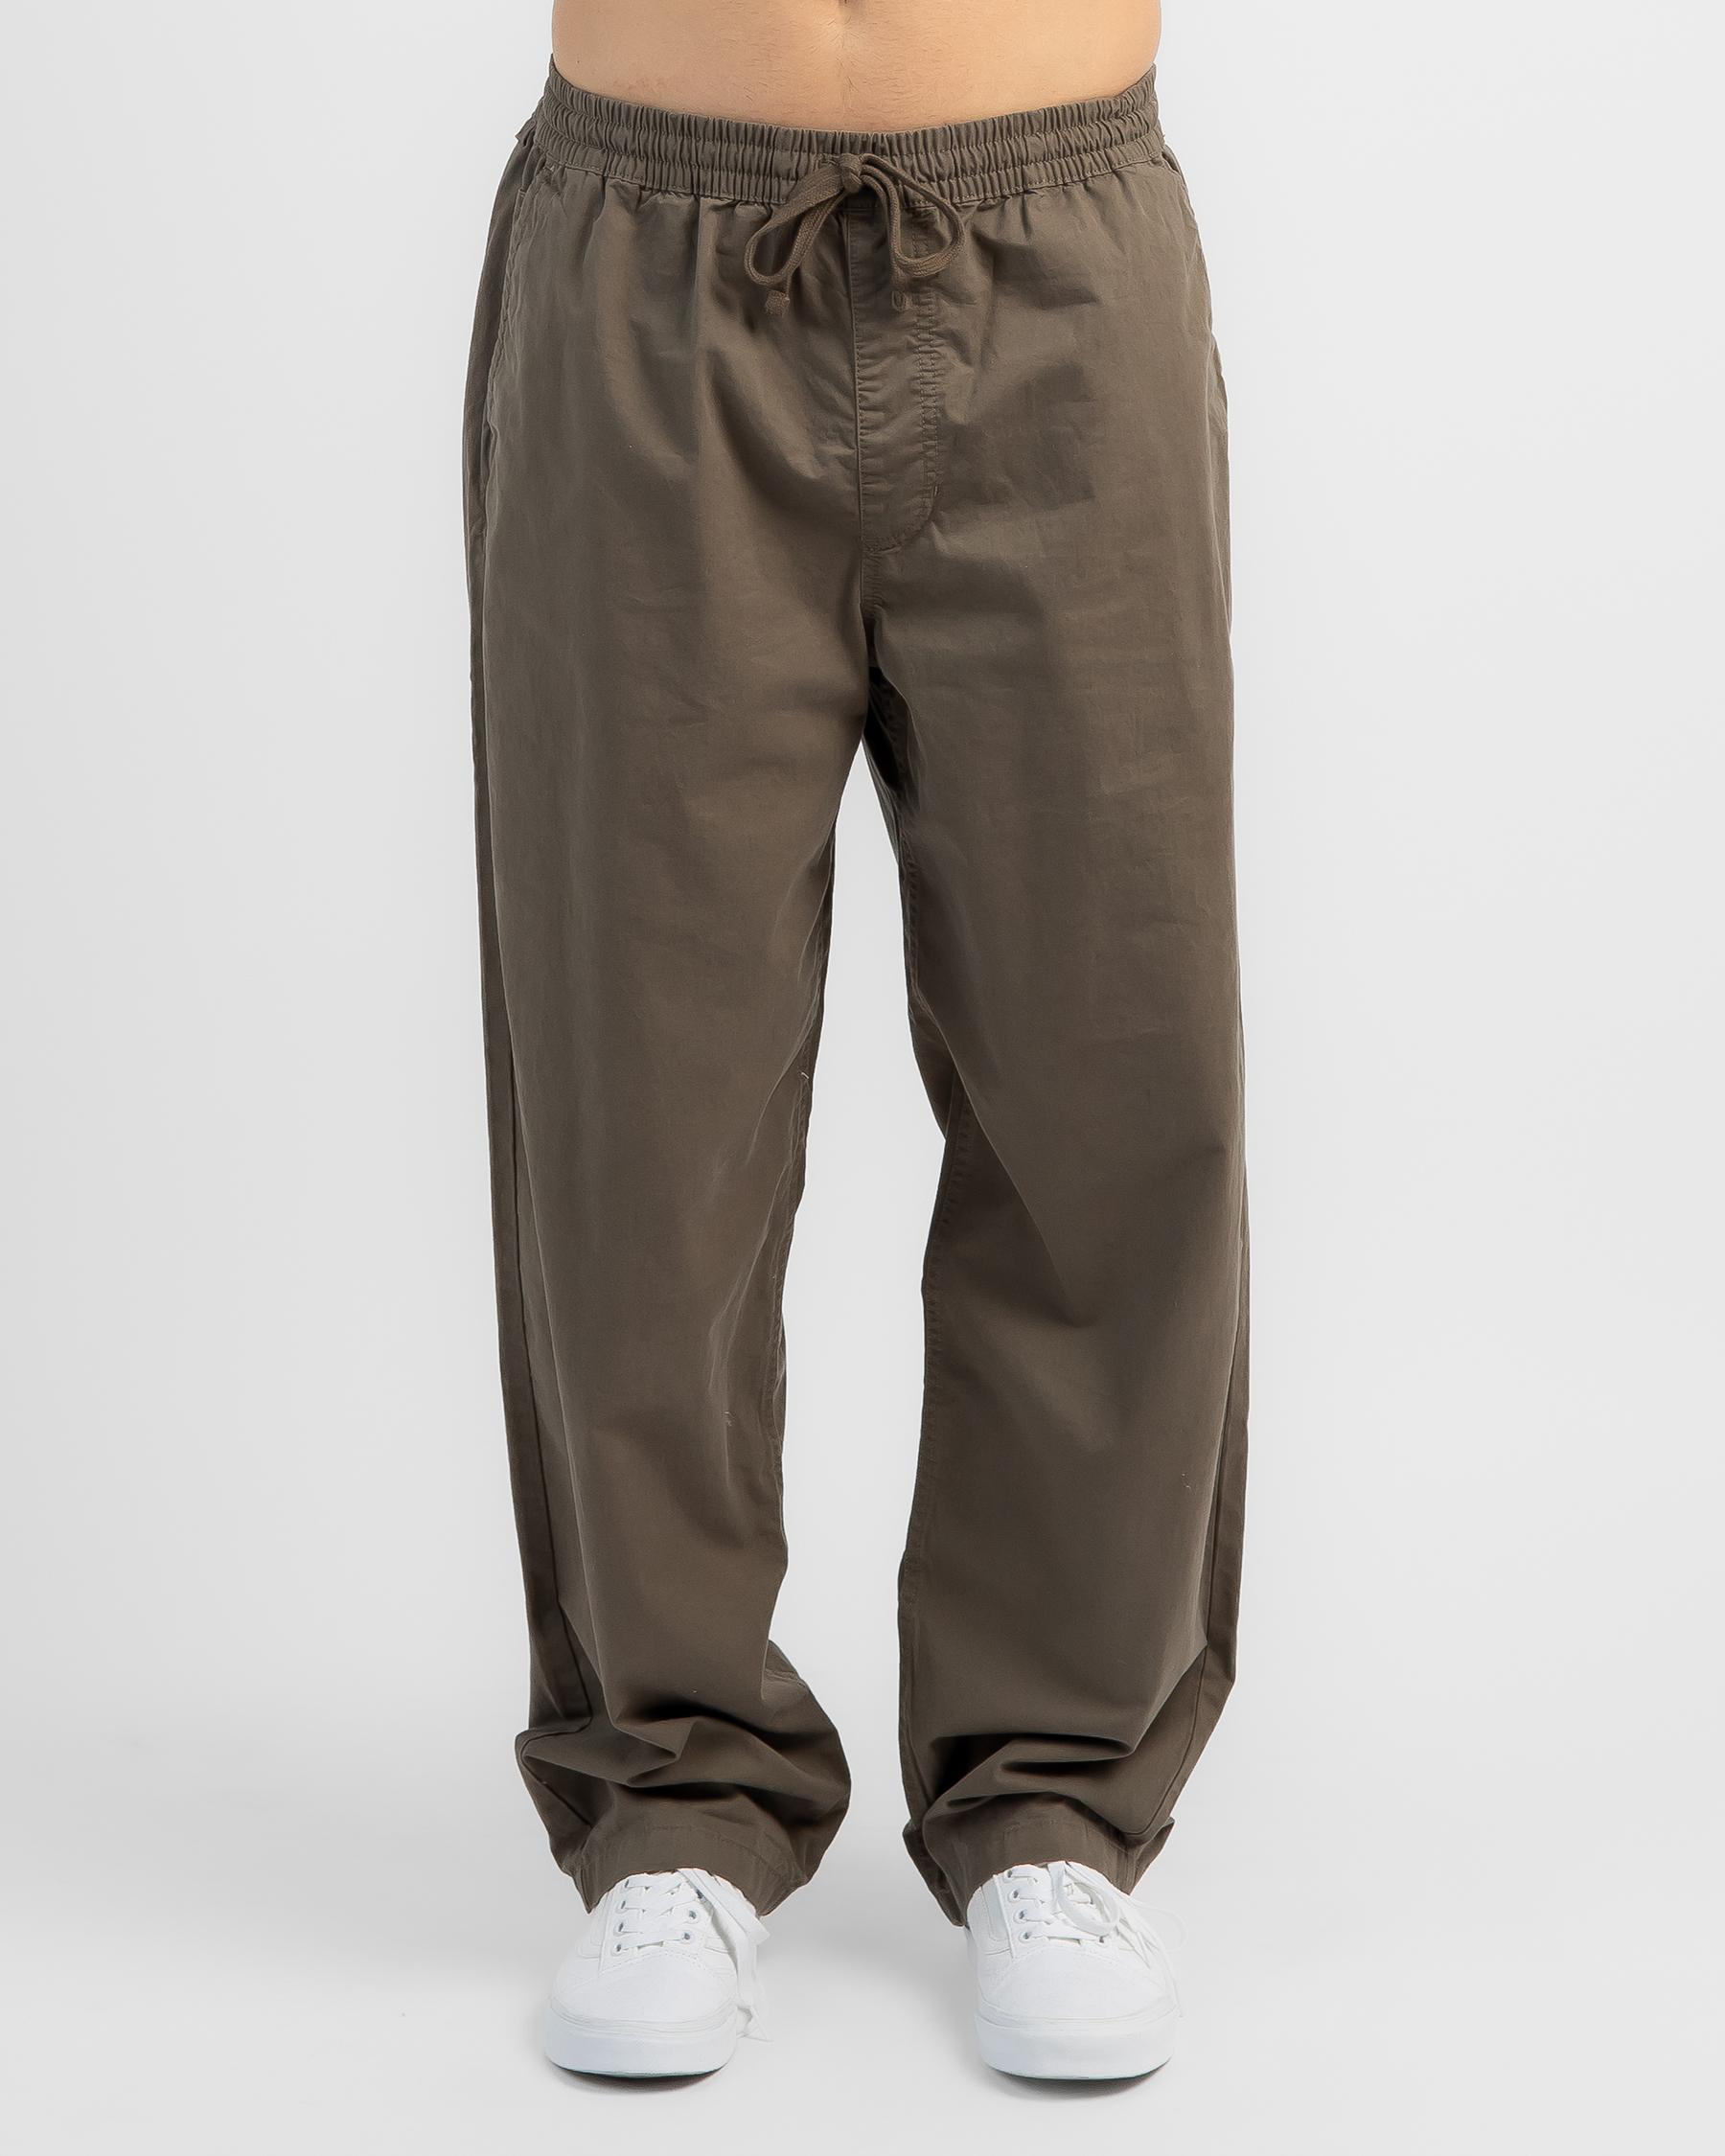 Vans Range Baggy Tapered Elastic Waist Pants In Canteen - Fast Shipping ...